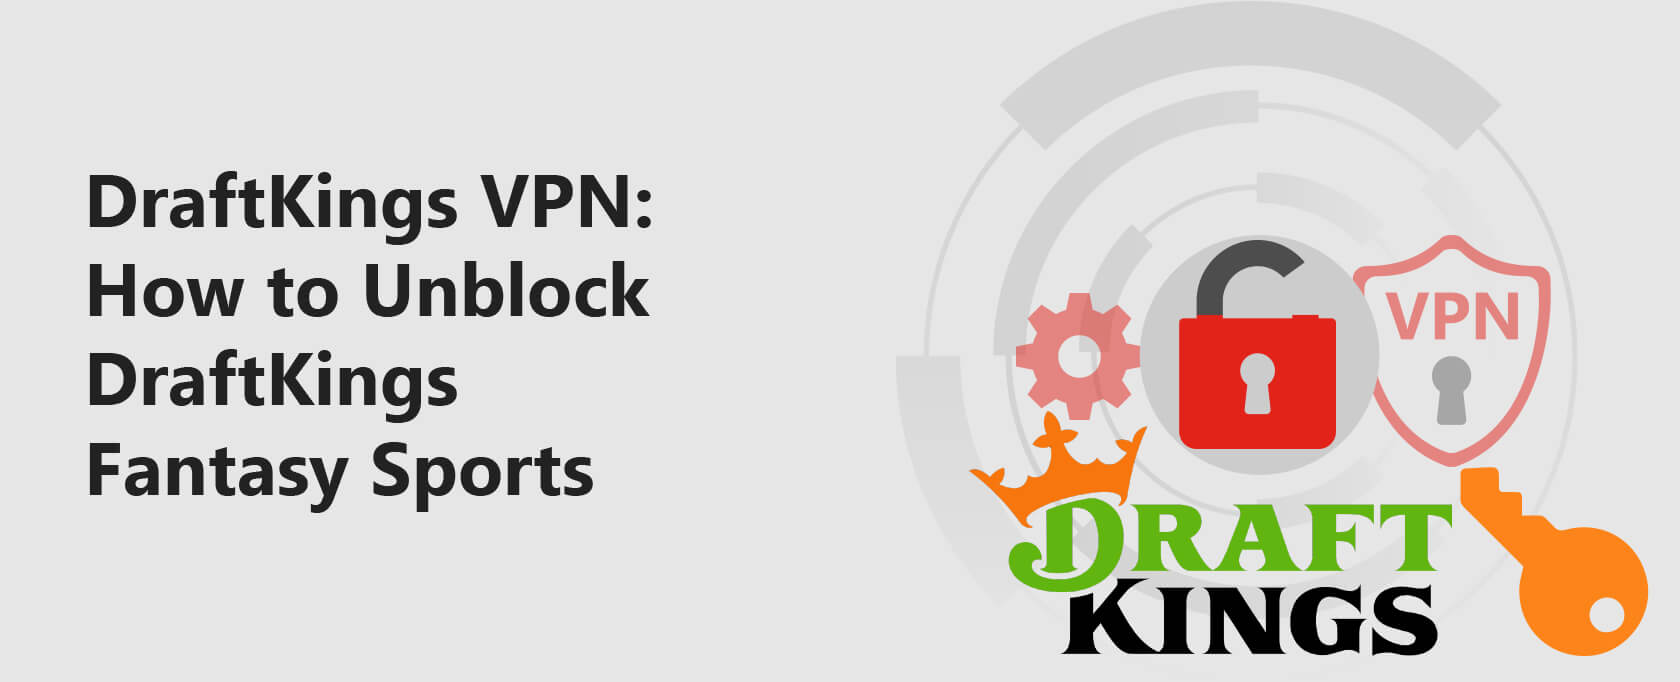 DraftKings VPN: How to Unblock DraftKings Fantasy Sports